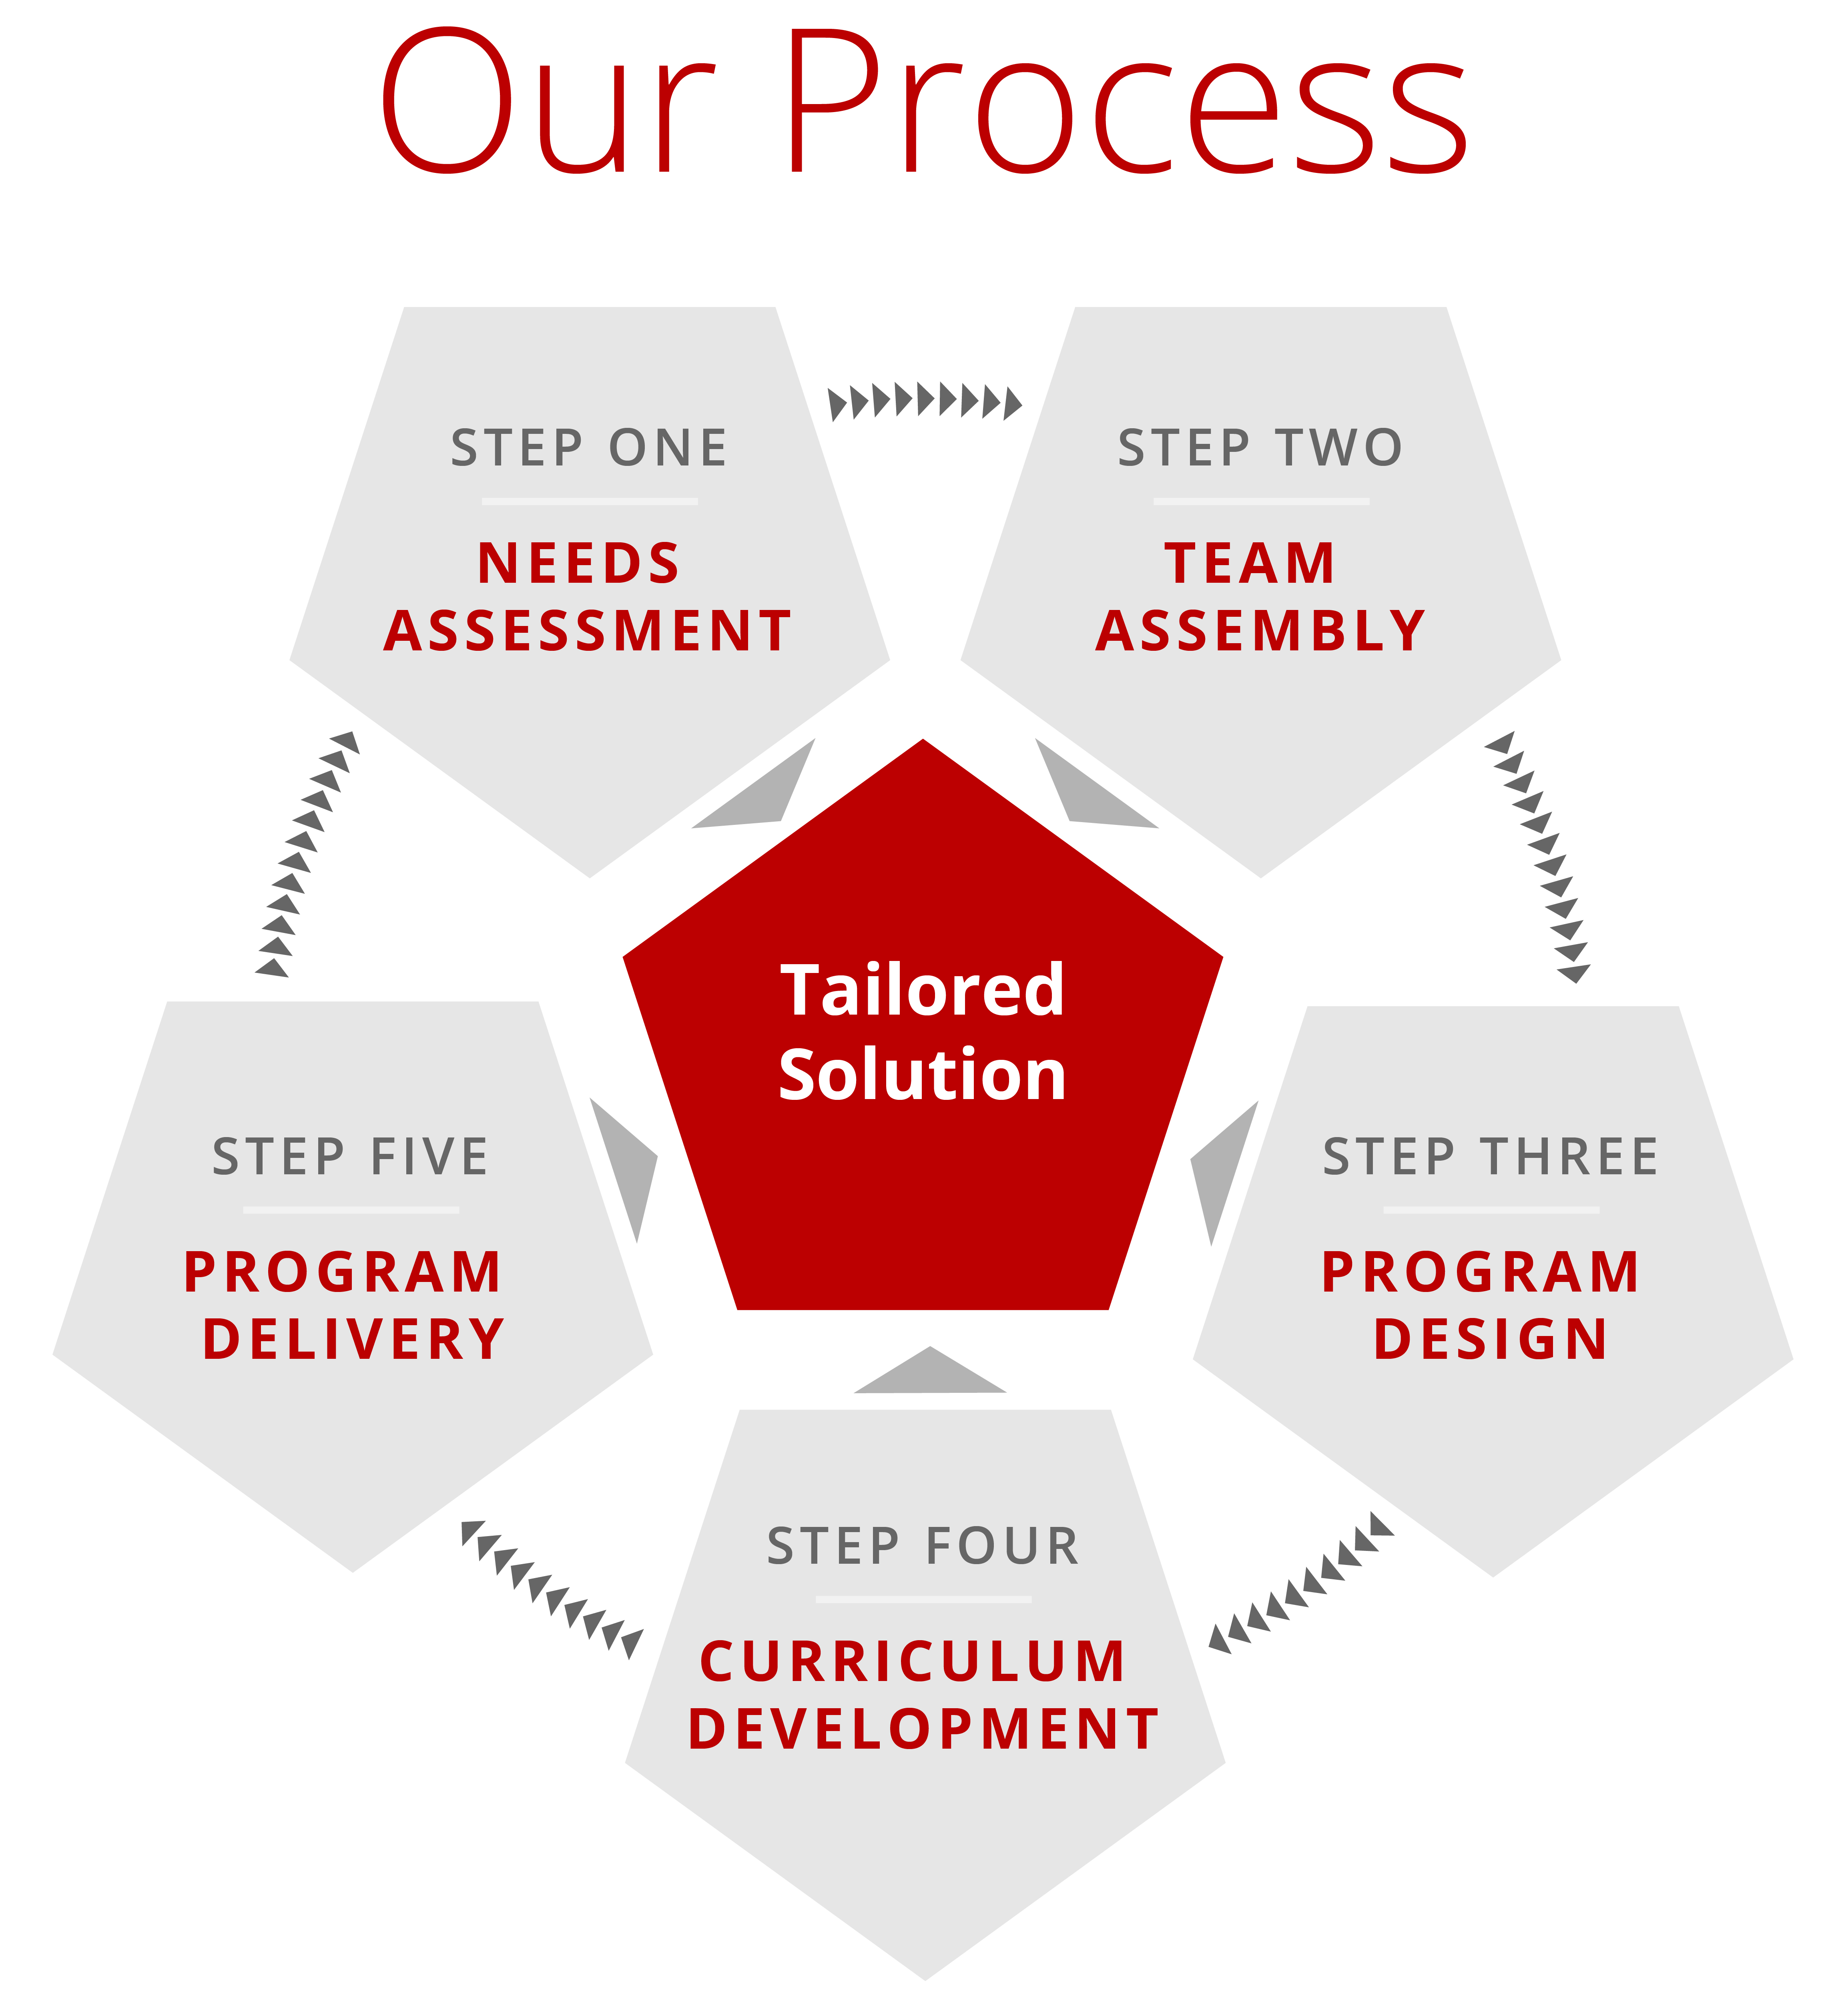 Tailored Solutions are developed through the following steps: Needs Assessment, Team Assembly, Program Design, Curriculum Development, and Program Delivery.